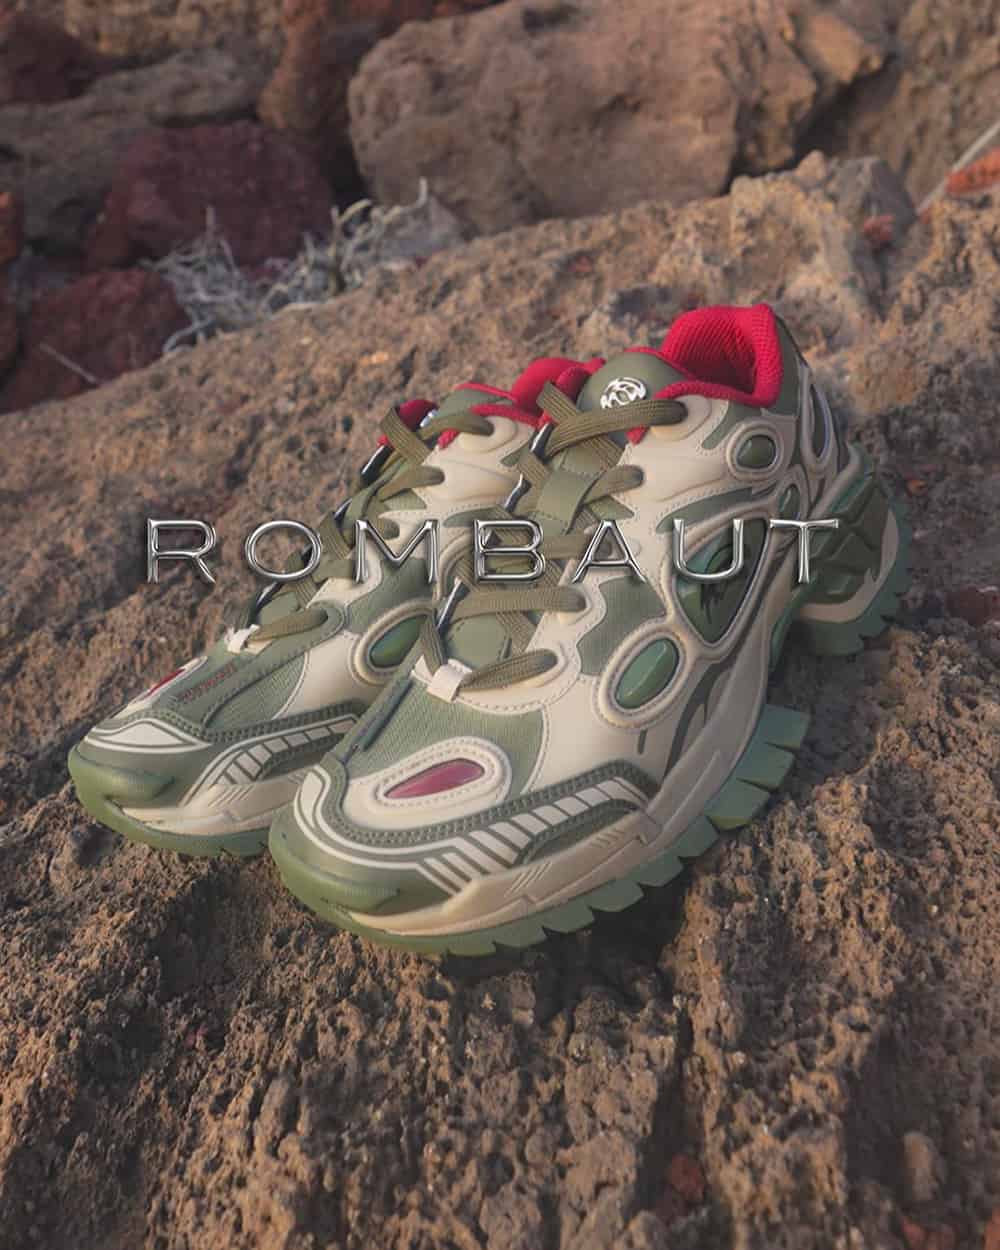 A pair of chunky Rombaut Nucleo Quicksilver sneakers in green and beige on some rocks